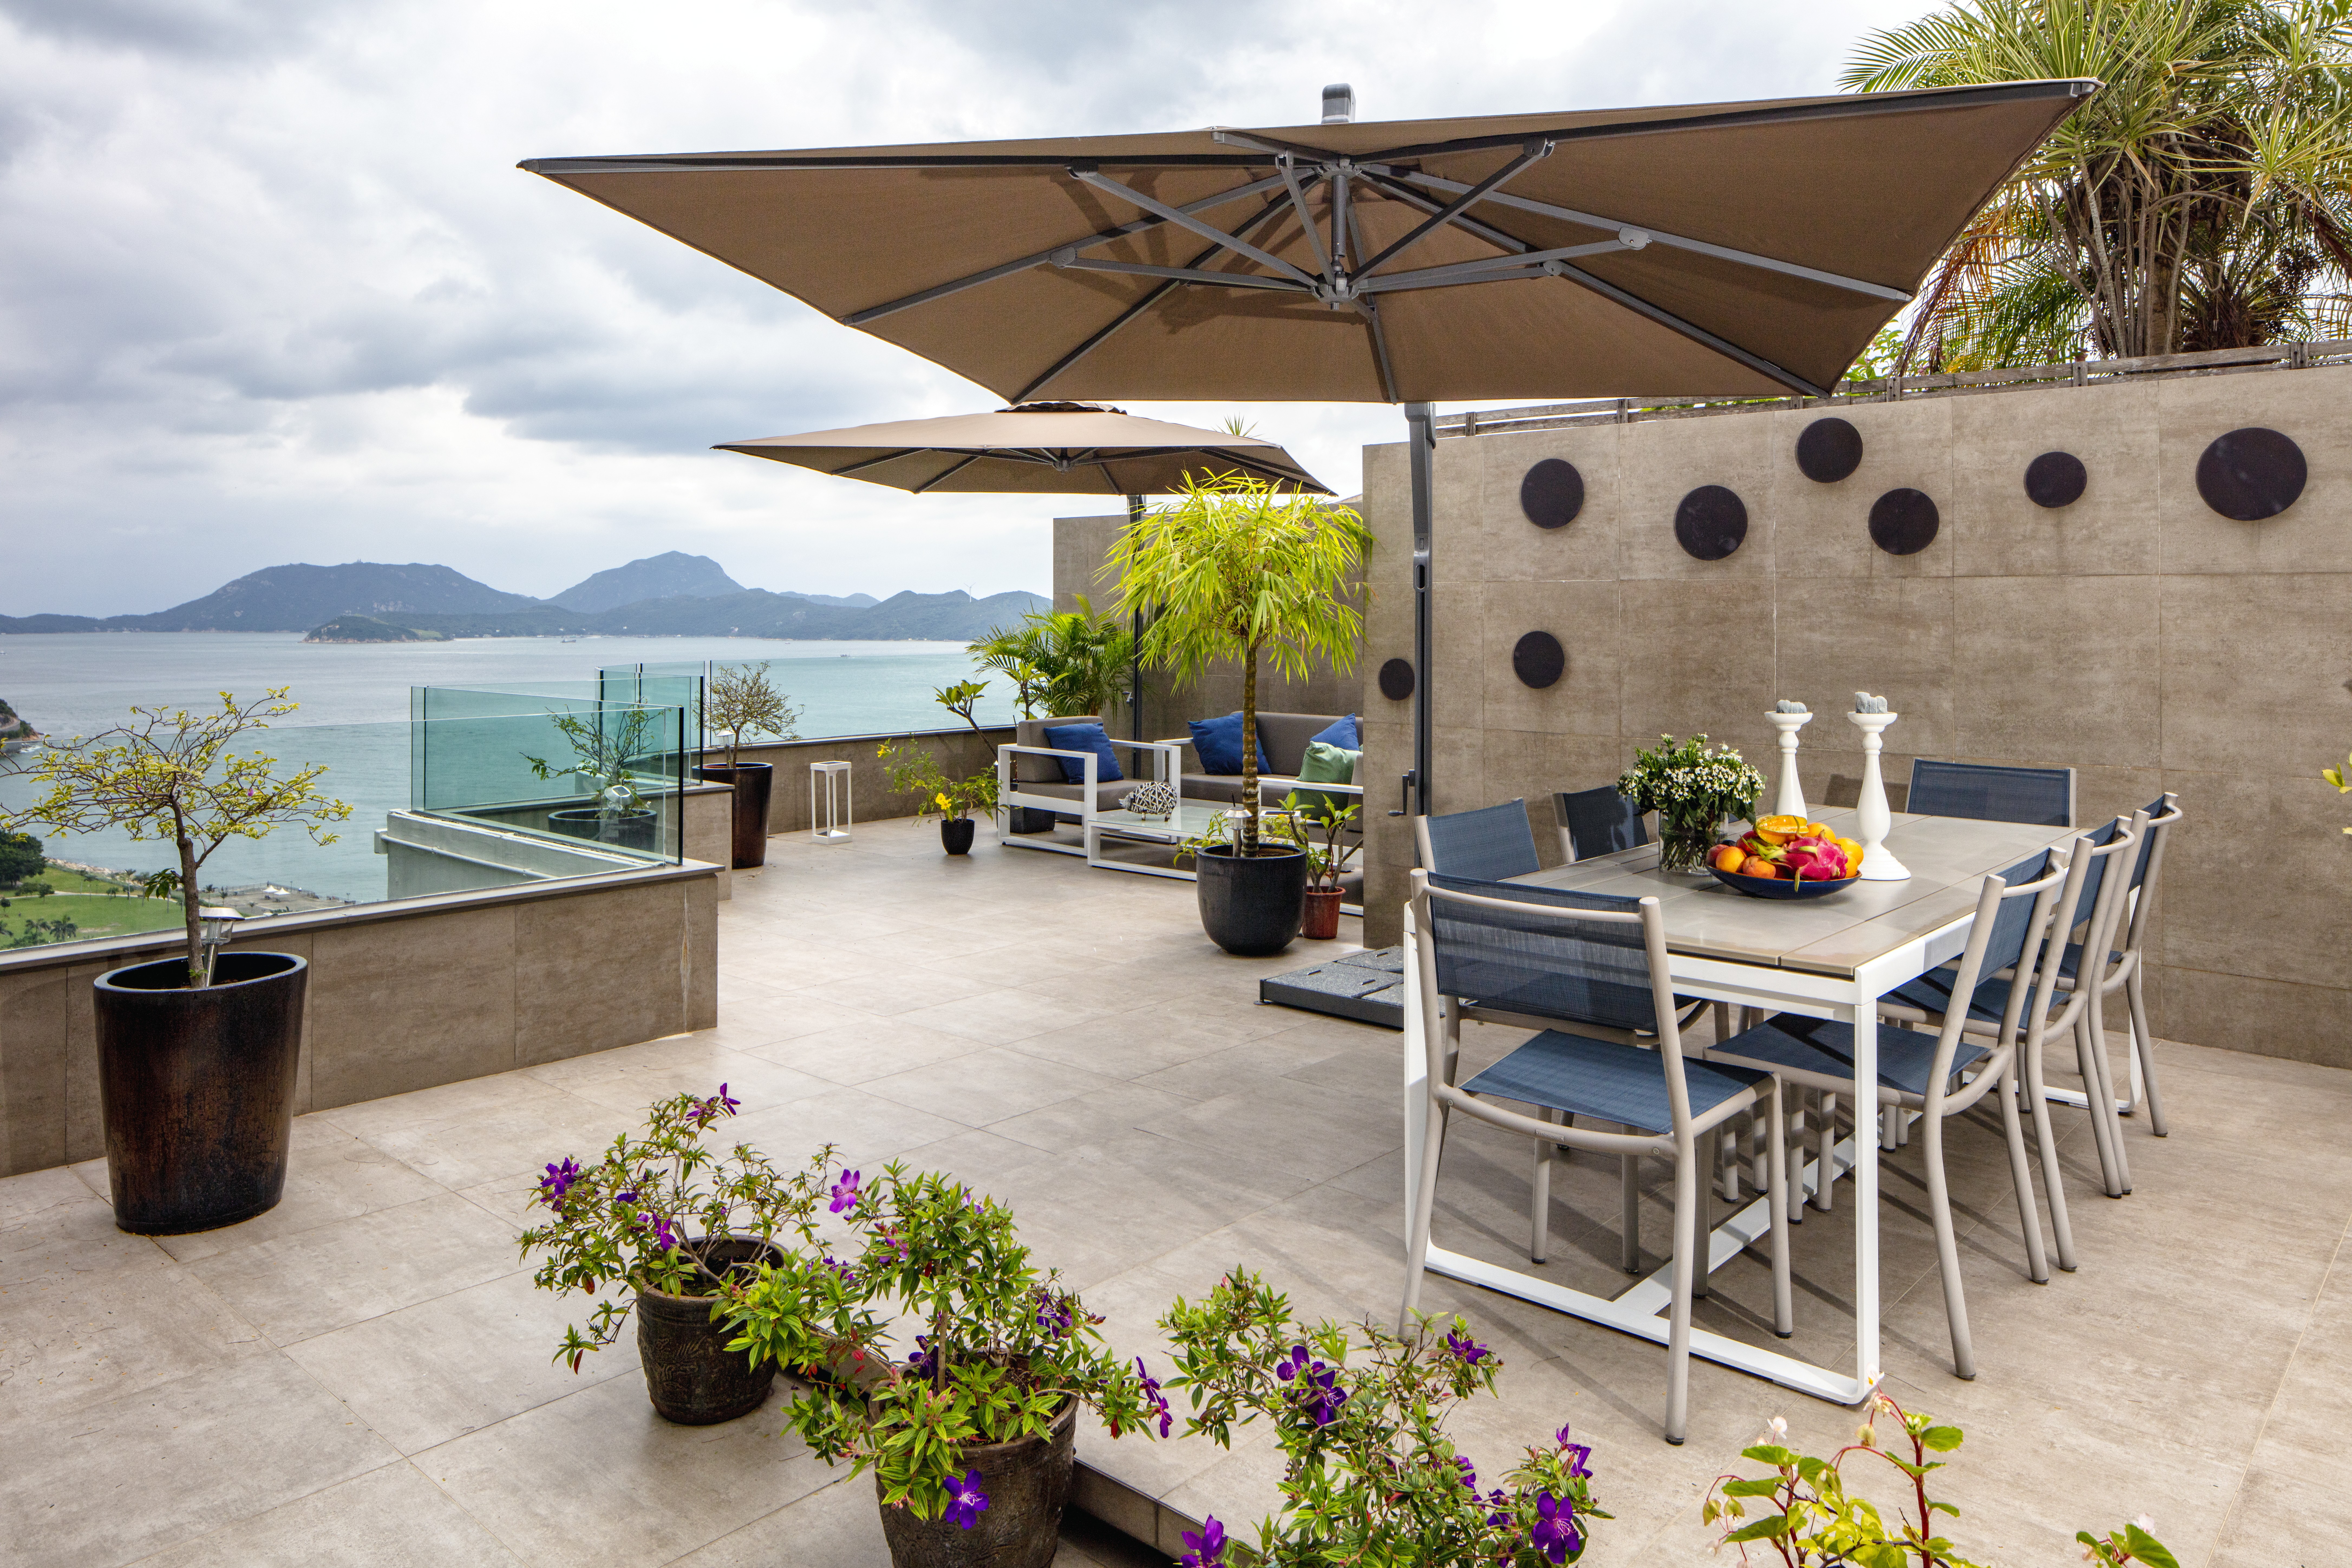 A family’s spacious Pok Fu Lam flat, complete with expansive terrace, brings the outdoors in